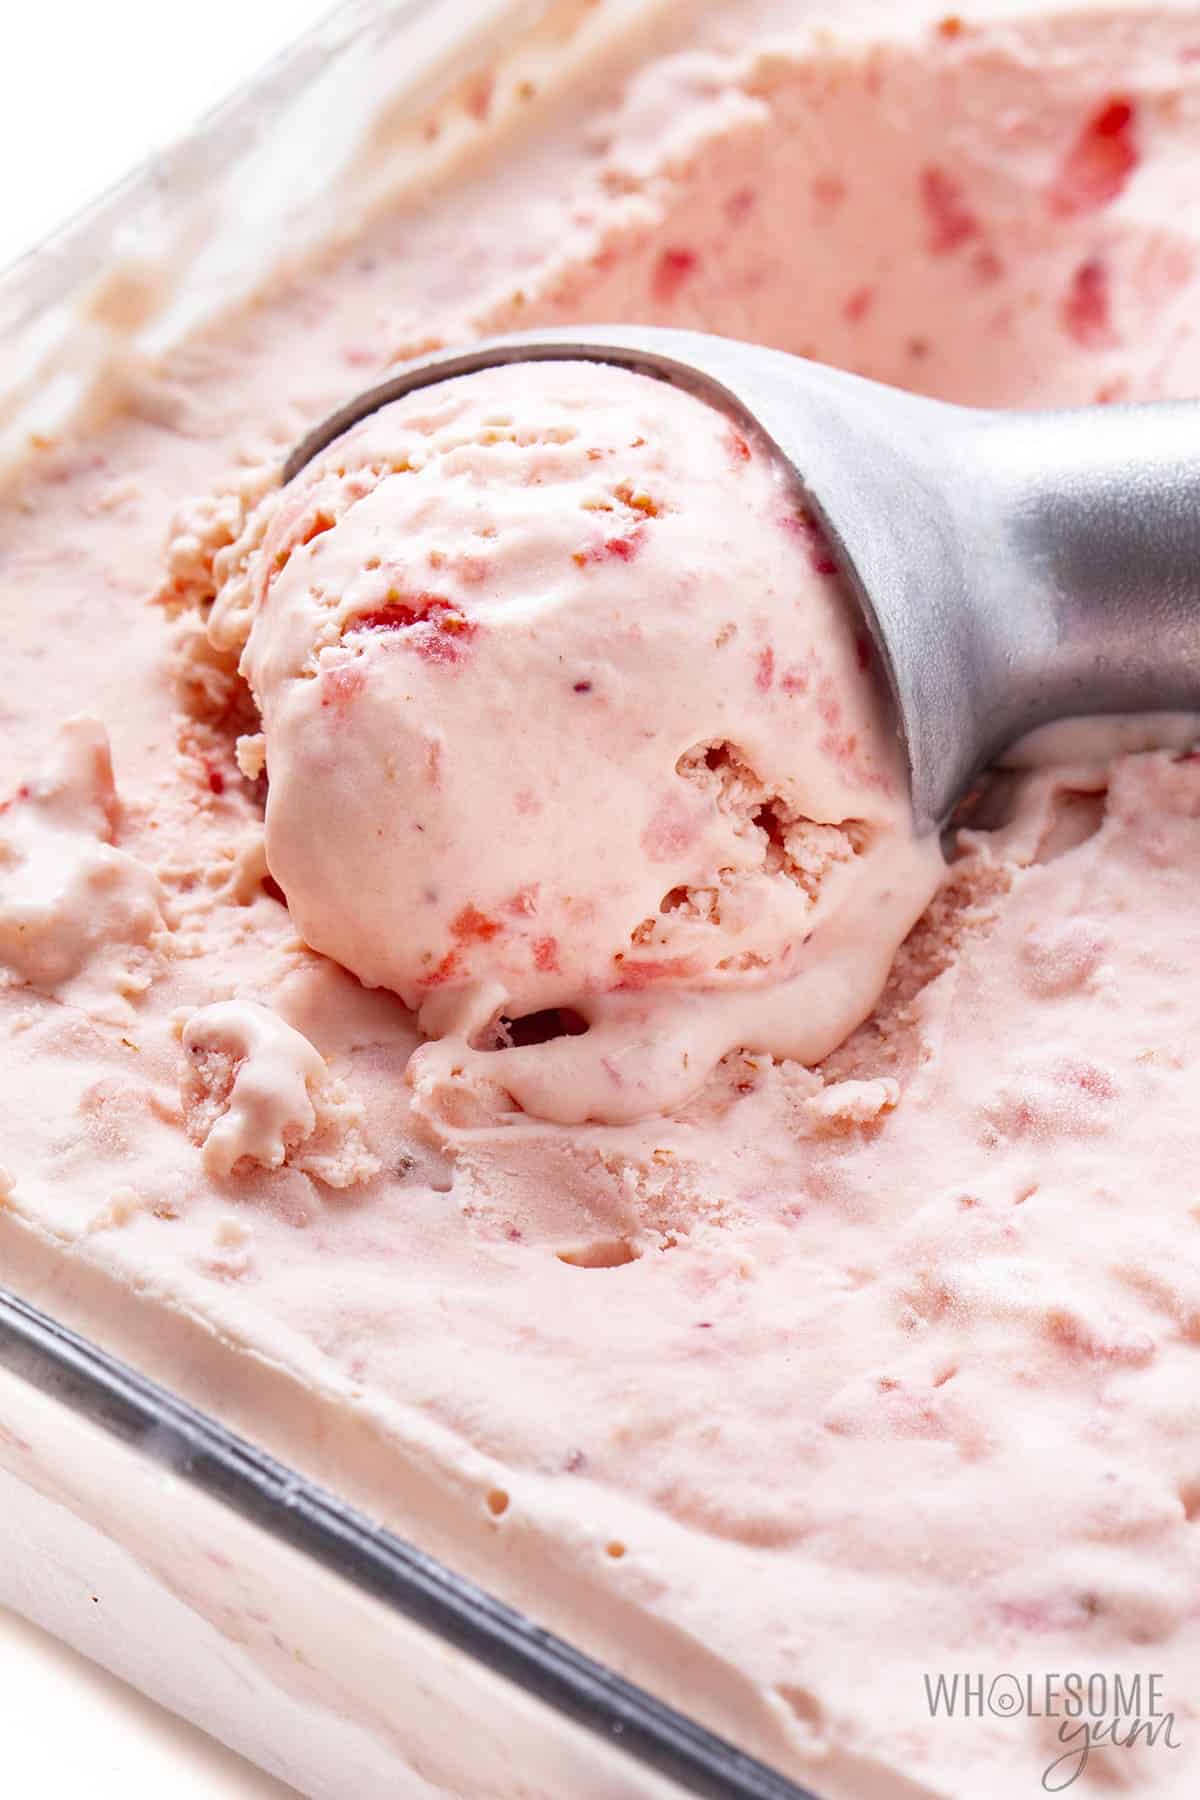 Strawberry Keto Ice Cream comes in a glass container with a scoop inside.